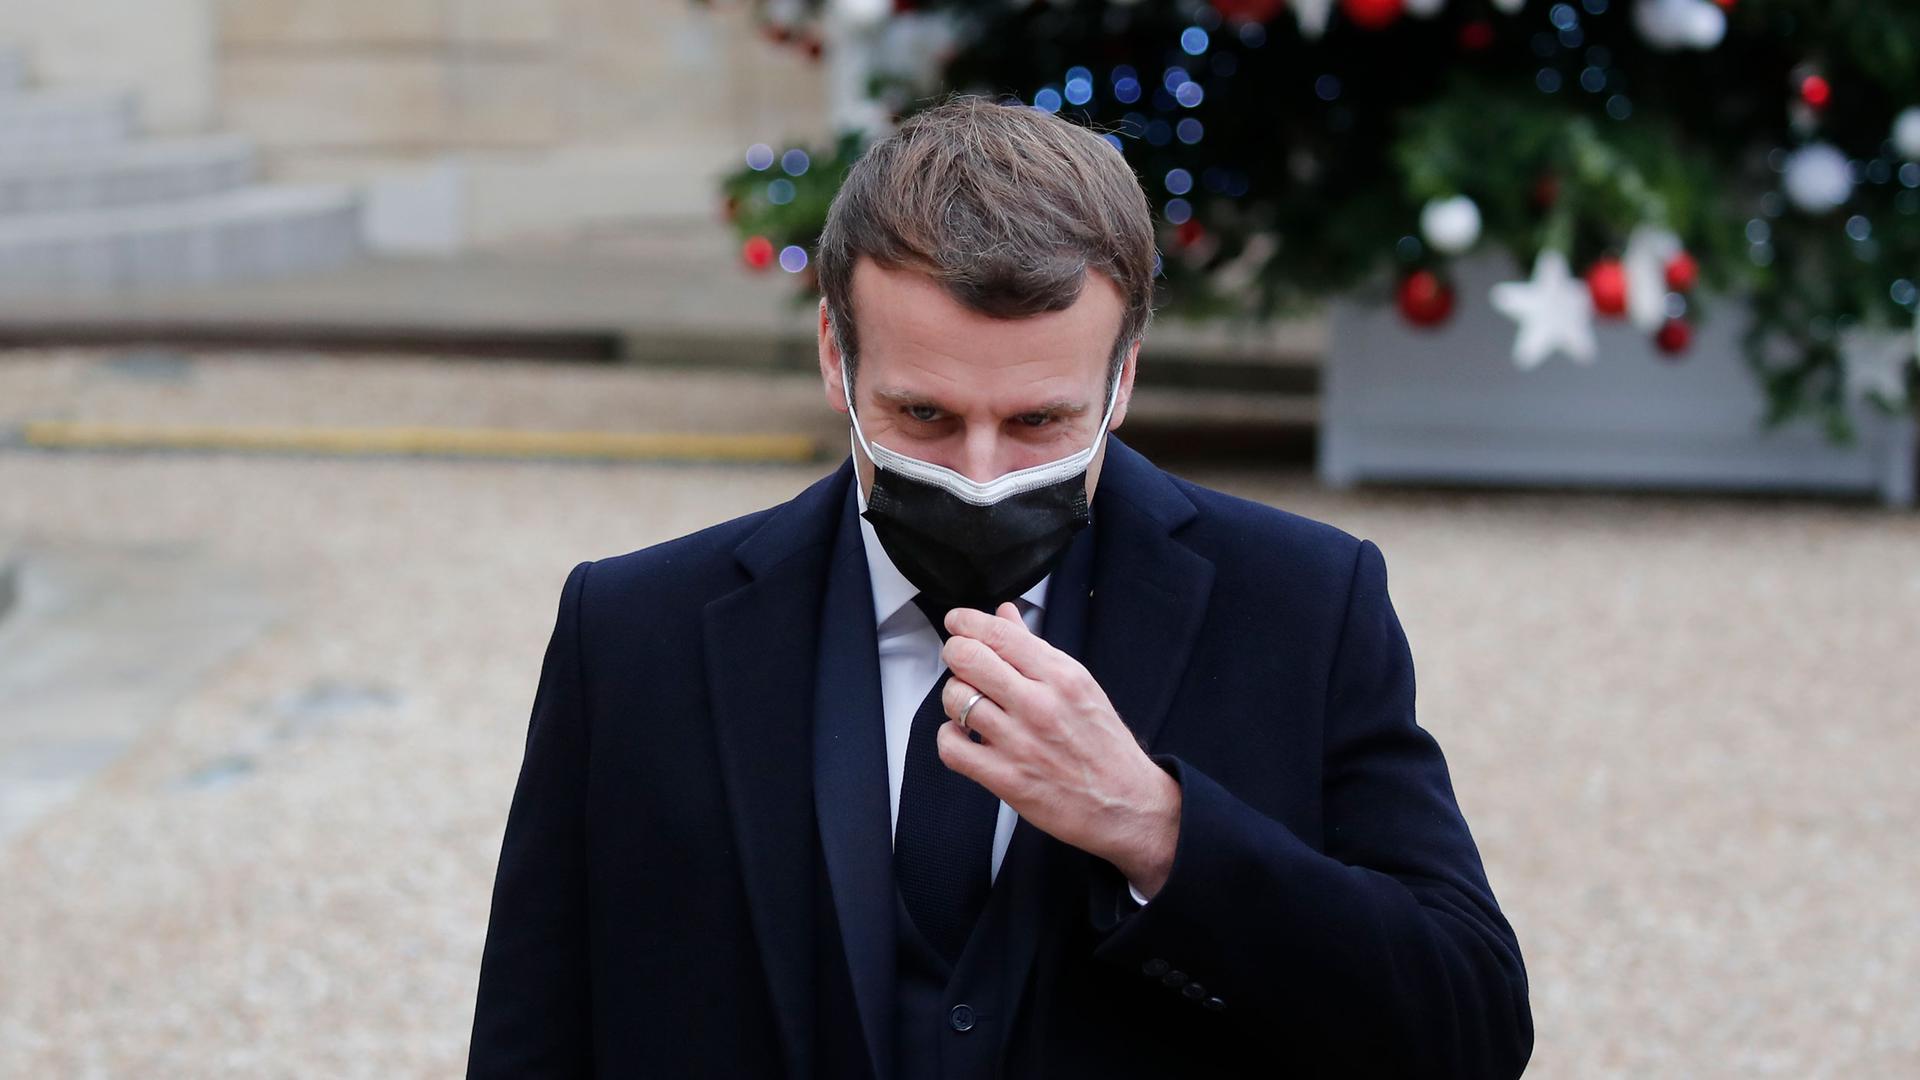 French President Emmanuel Macron is shown wearing a face mask and dark suit while standing outside.